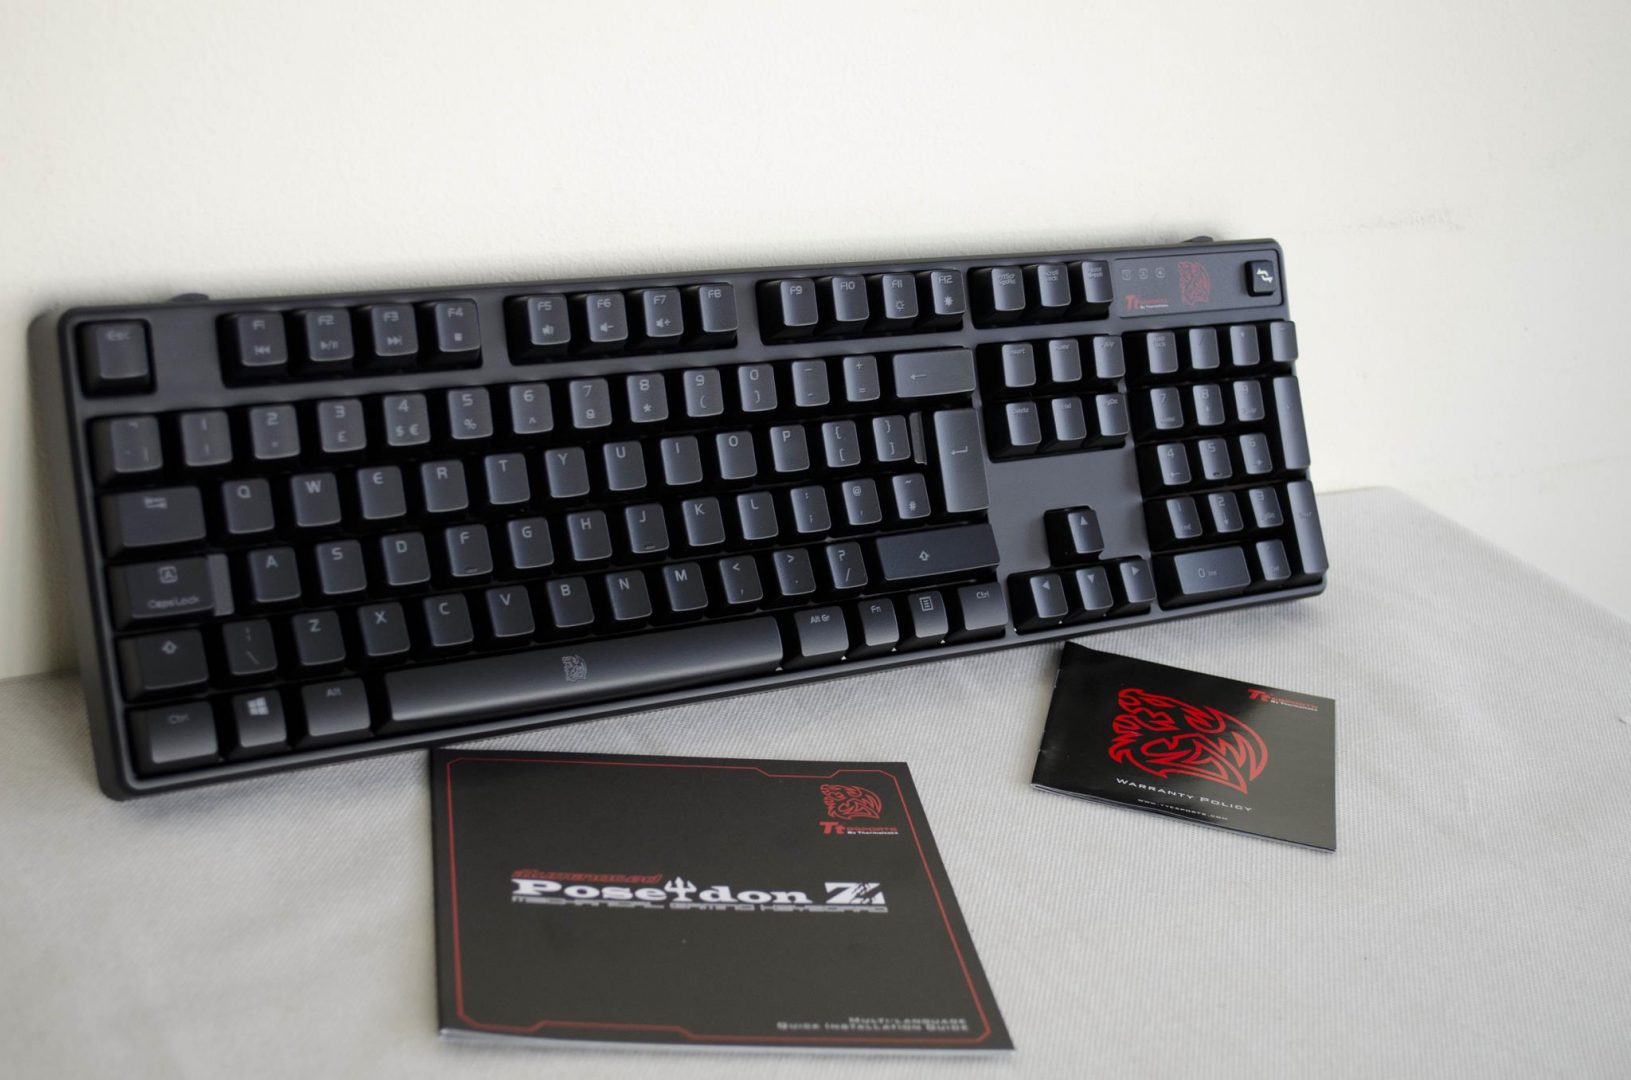 Tt eSPORTS POSEIDON Z Mechanical Keyboard with Kailh Brown Switches Review